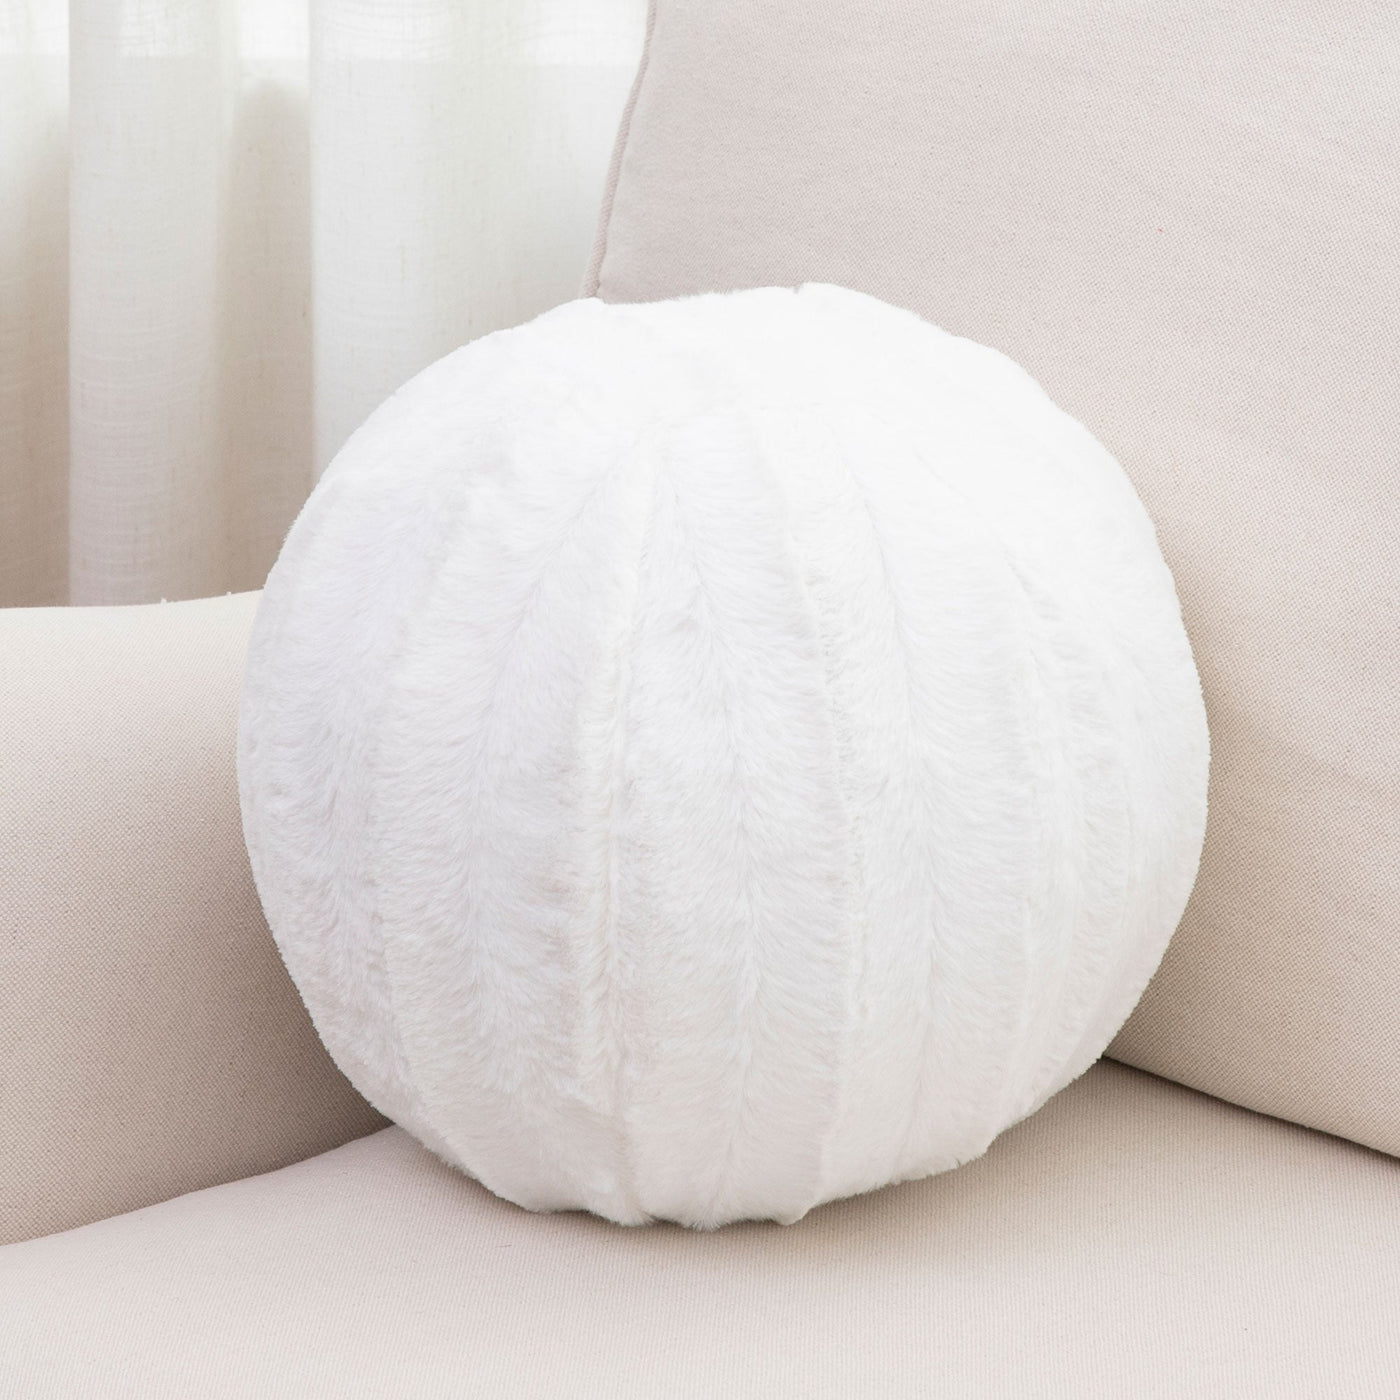 https://www.cheercollection.com/cdn/shop/products/cheer-collection-ball-throw-pillows-for-living-room-decor-decorative-pillows-for-couch-fluffy-aesthetic-cuddle-pillow-with-insert-10-round-583798_1400x.jpg?v=1683775475